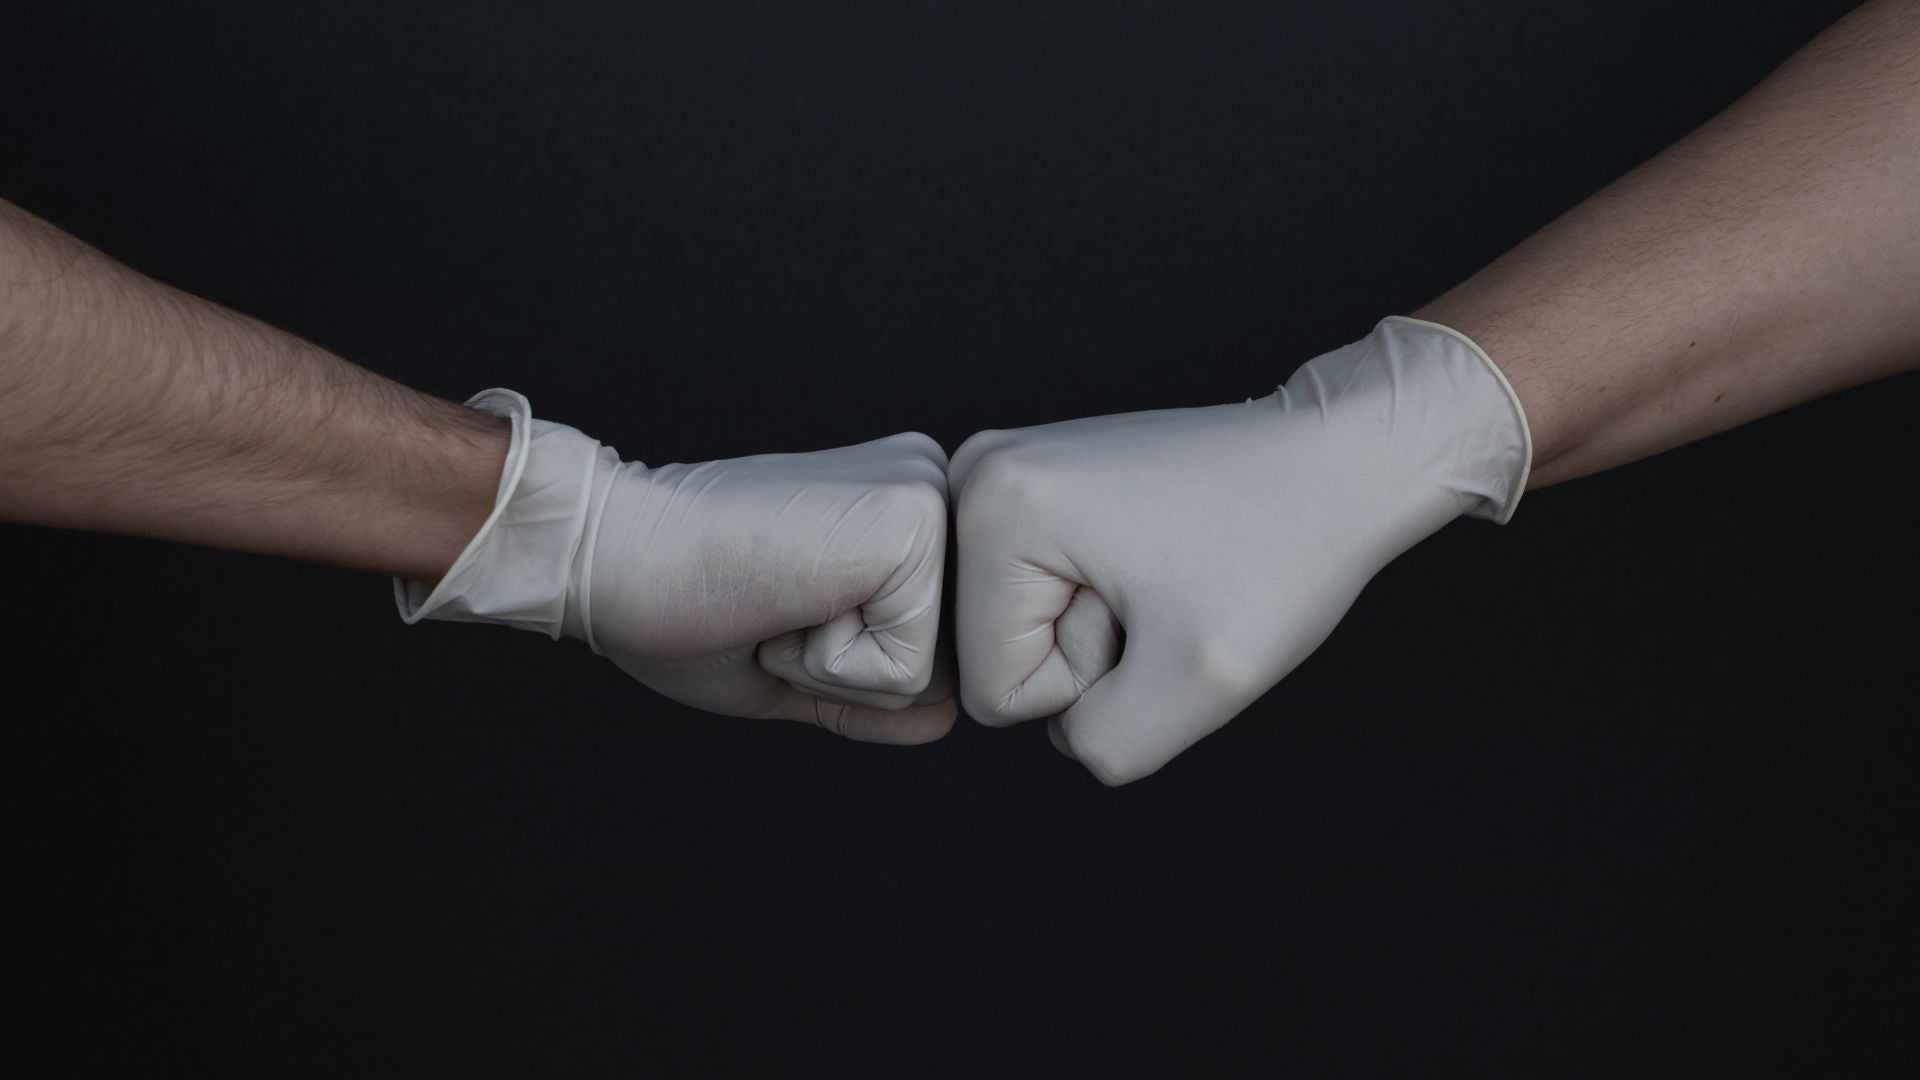 two hands in white gloves, engage in a fist bump gesture